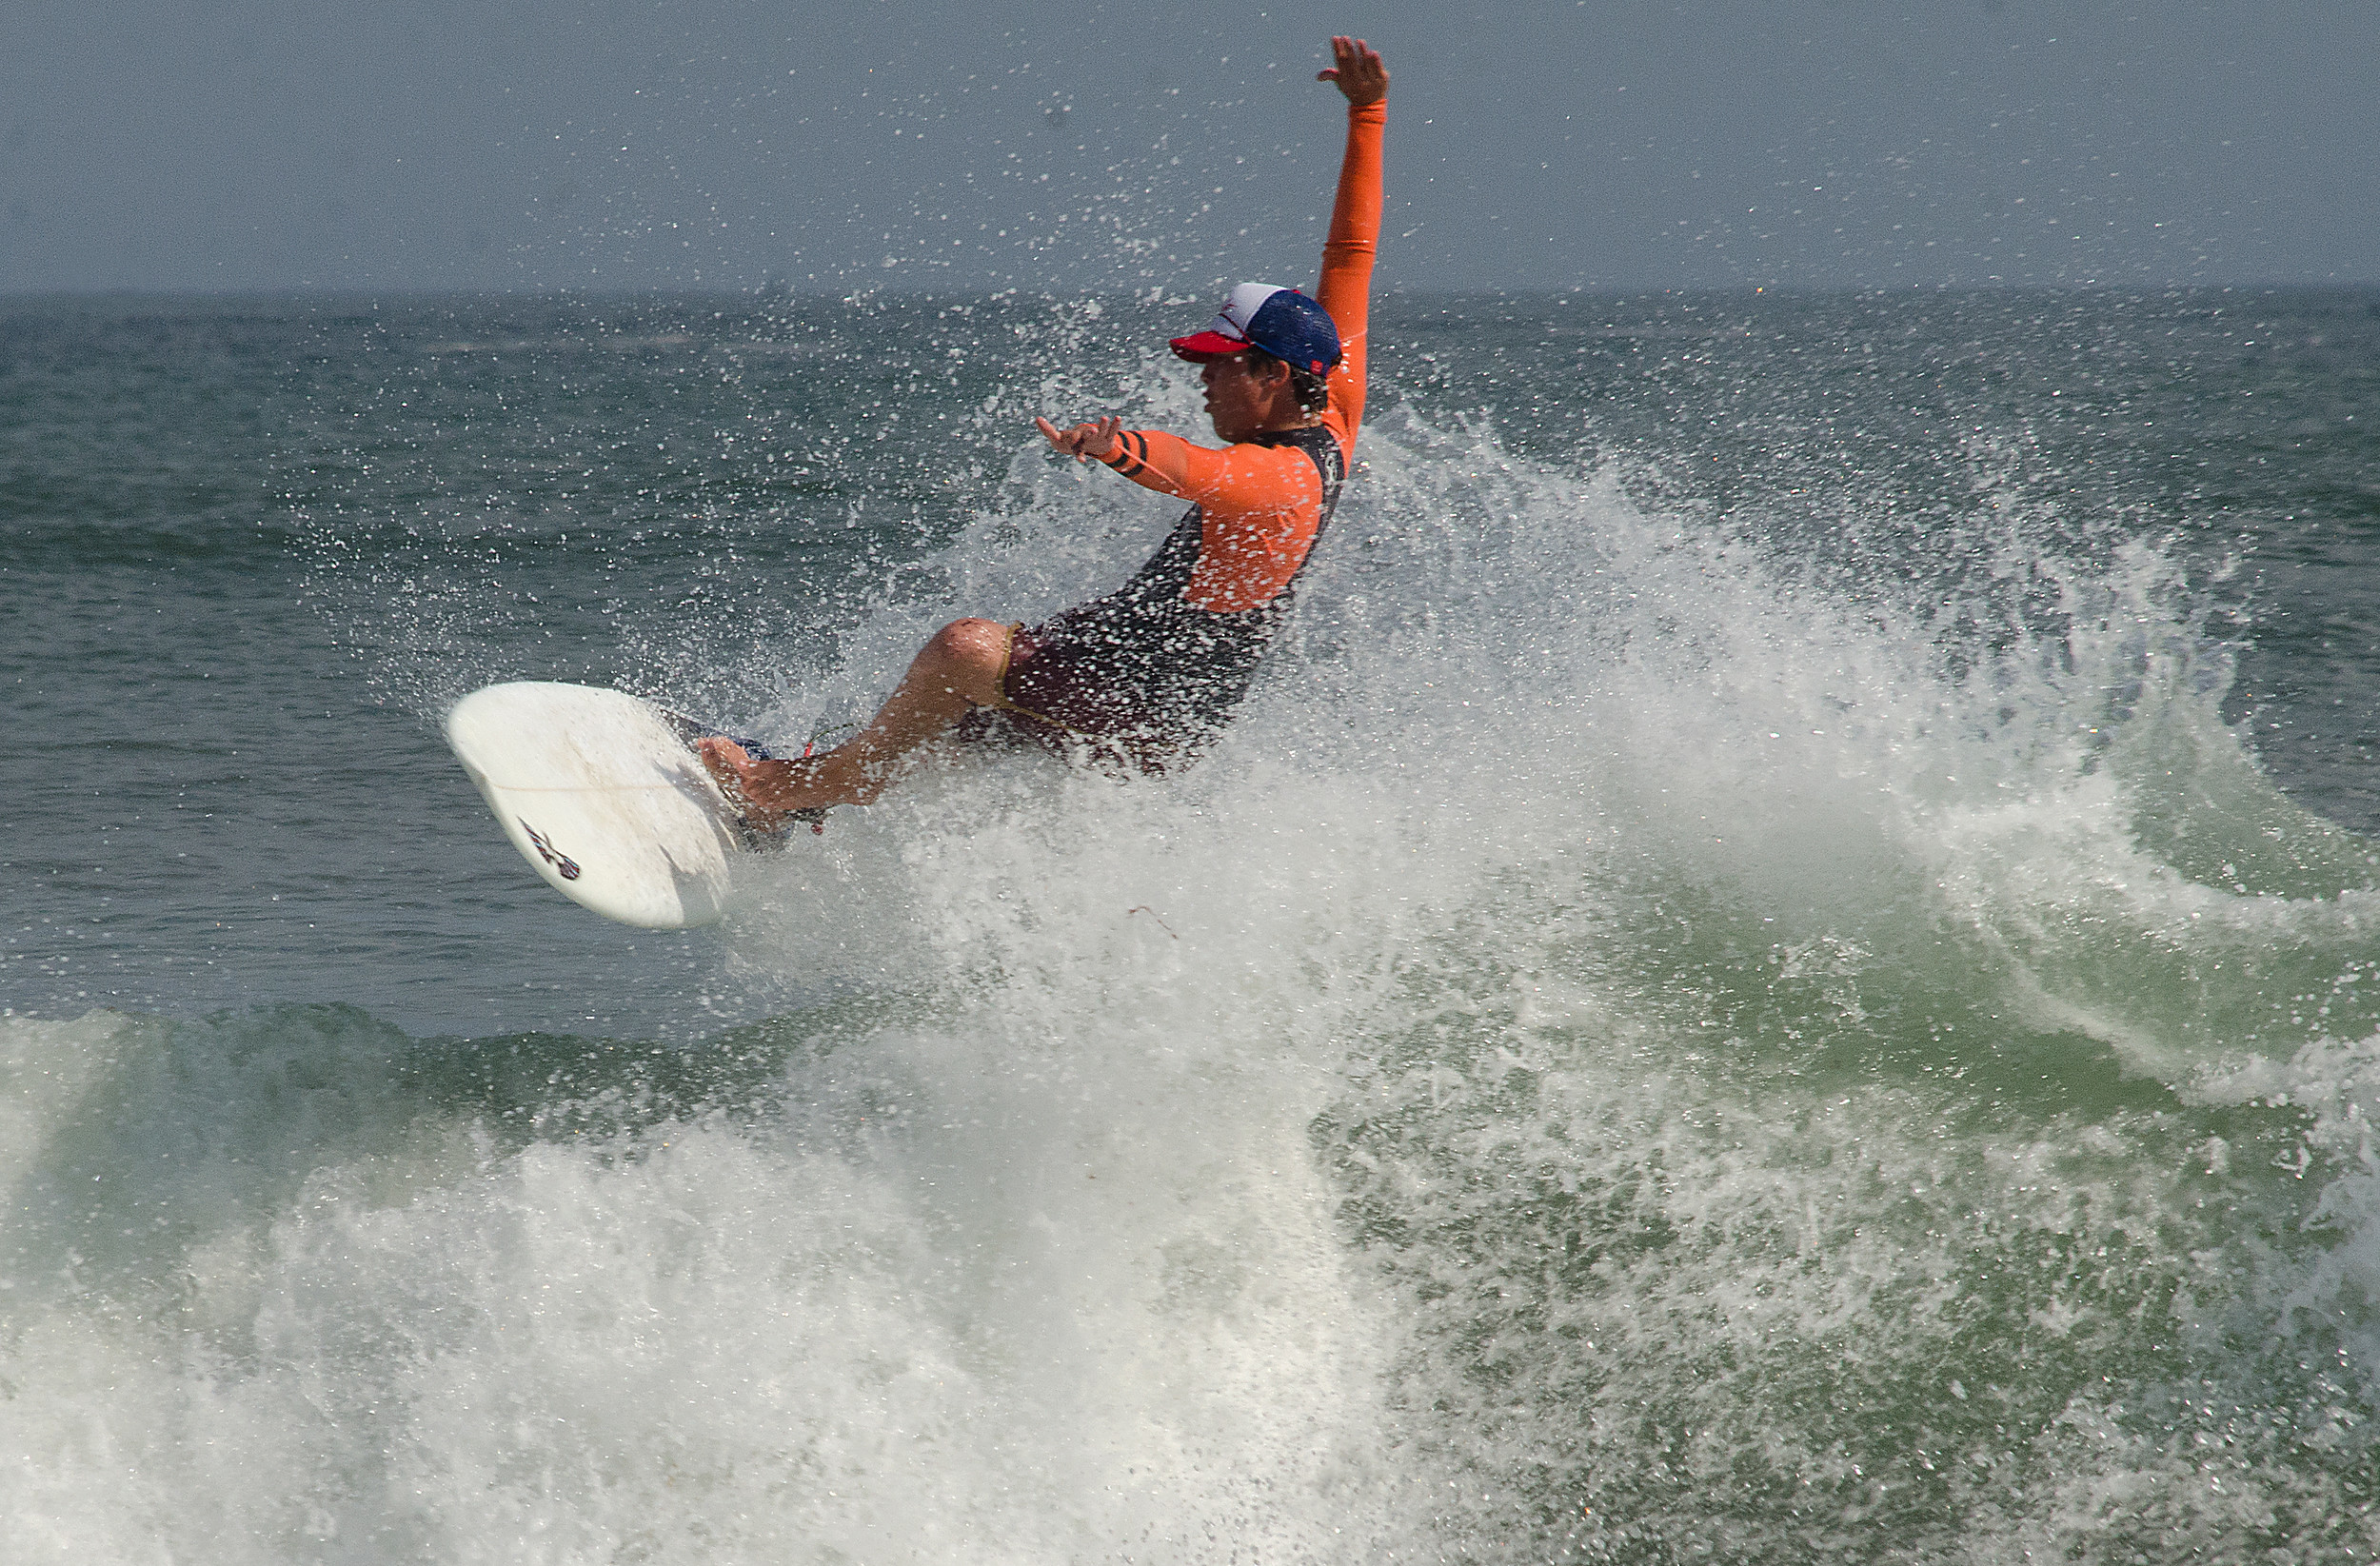 Ed Barend catches air off a wave.